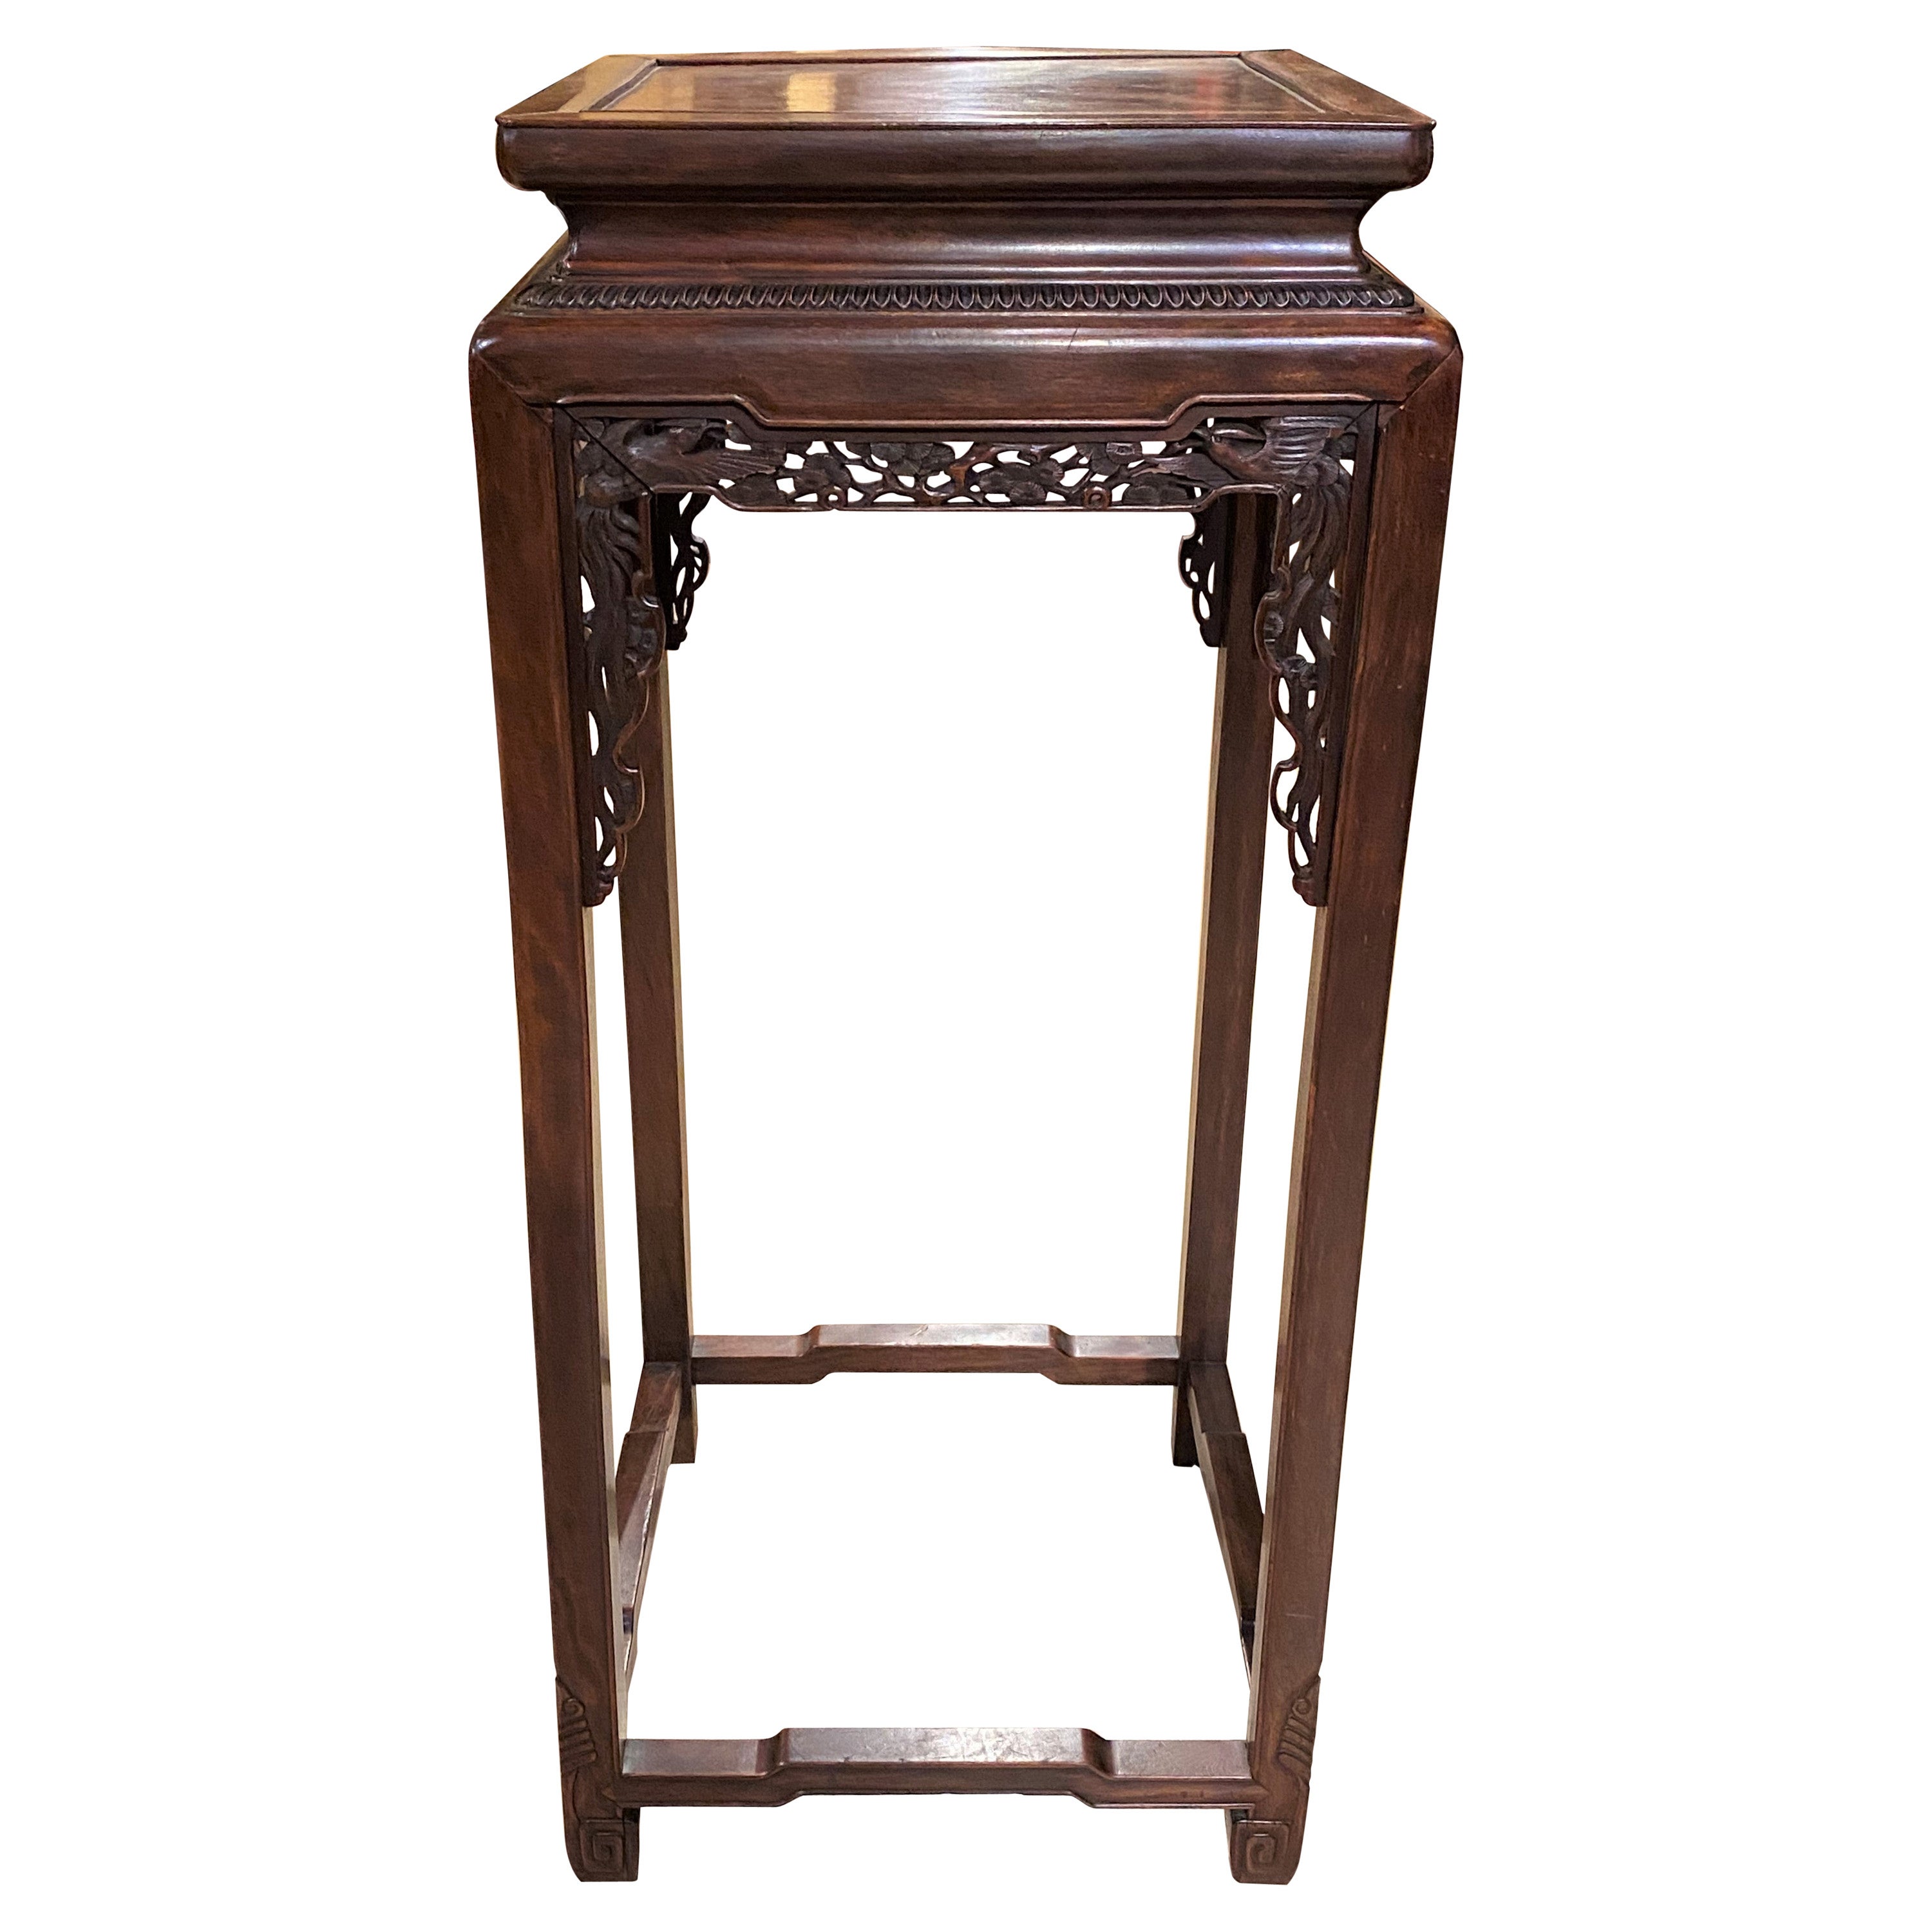 Early 20th C Tall Chinese Hardwood Side Table with Carved Bird Decoration For Sale